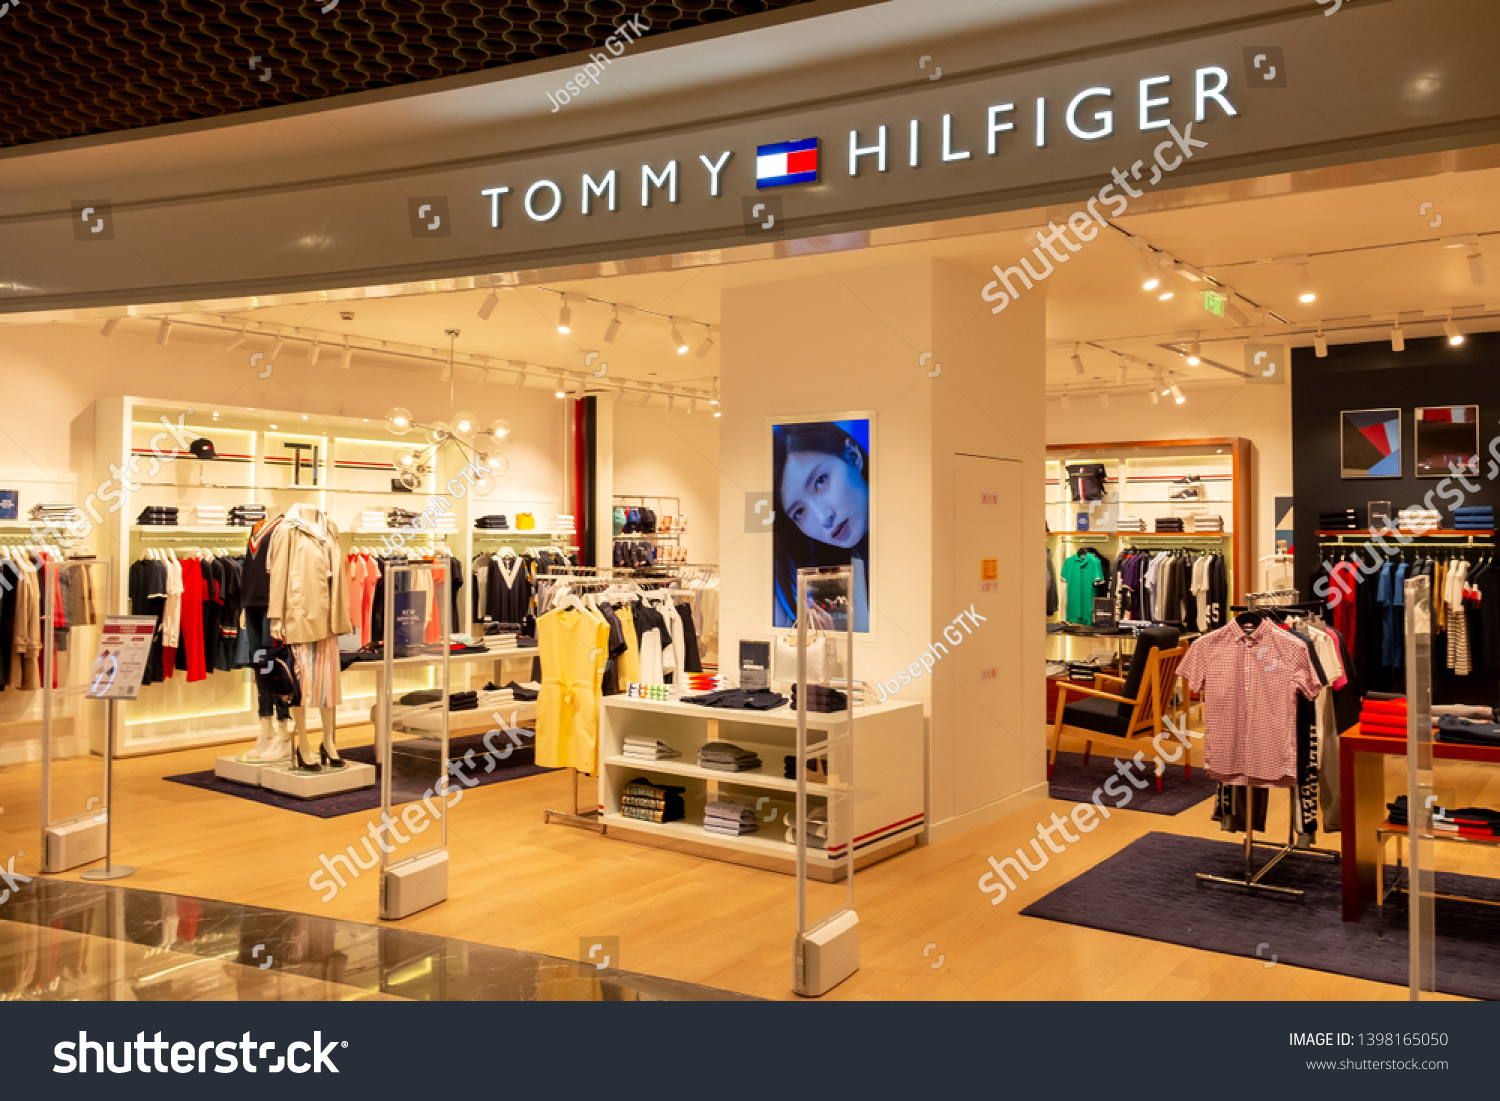 tommy hilfiger mall of asia